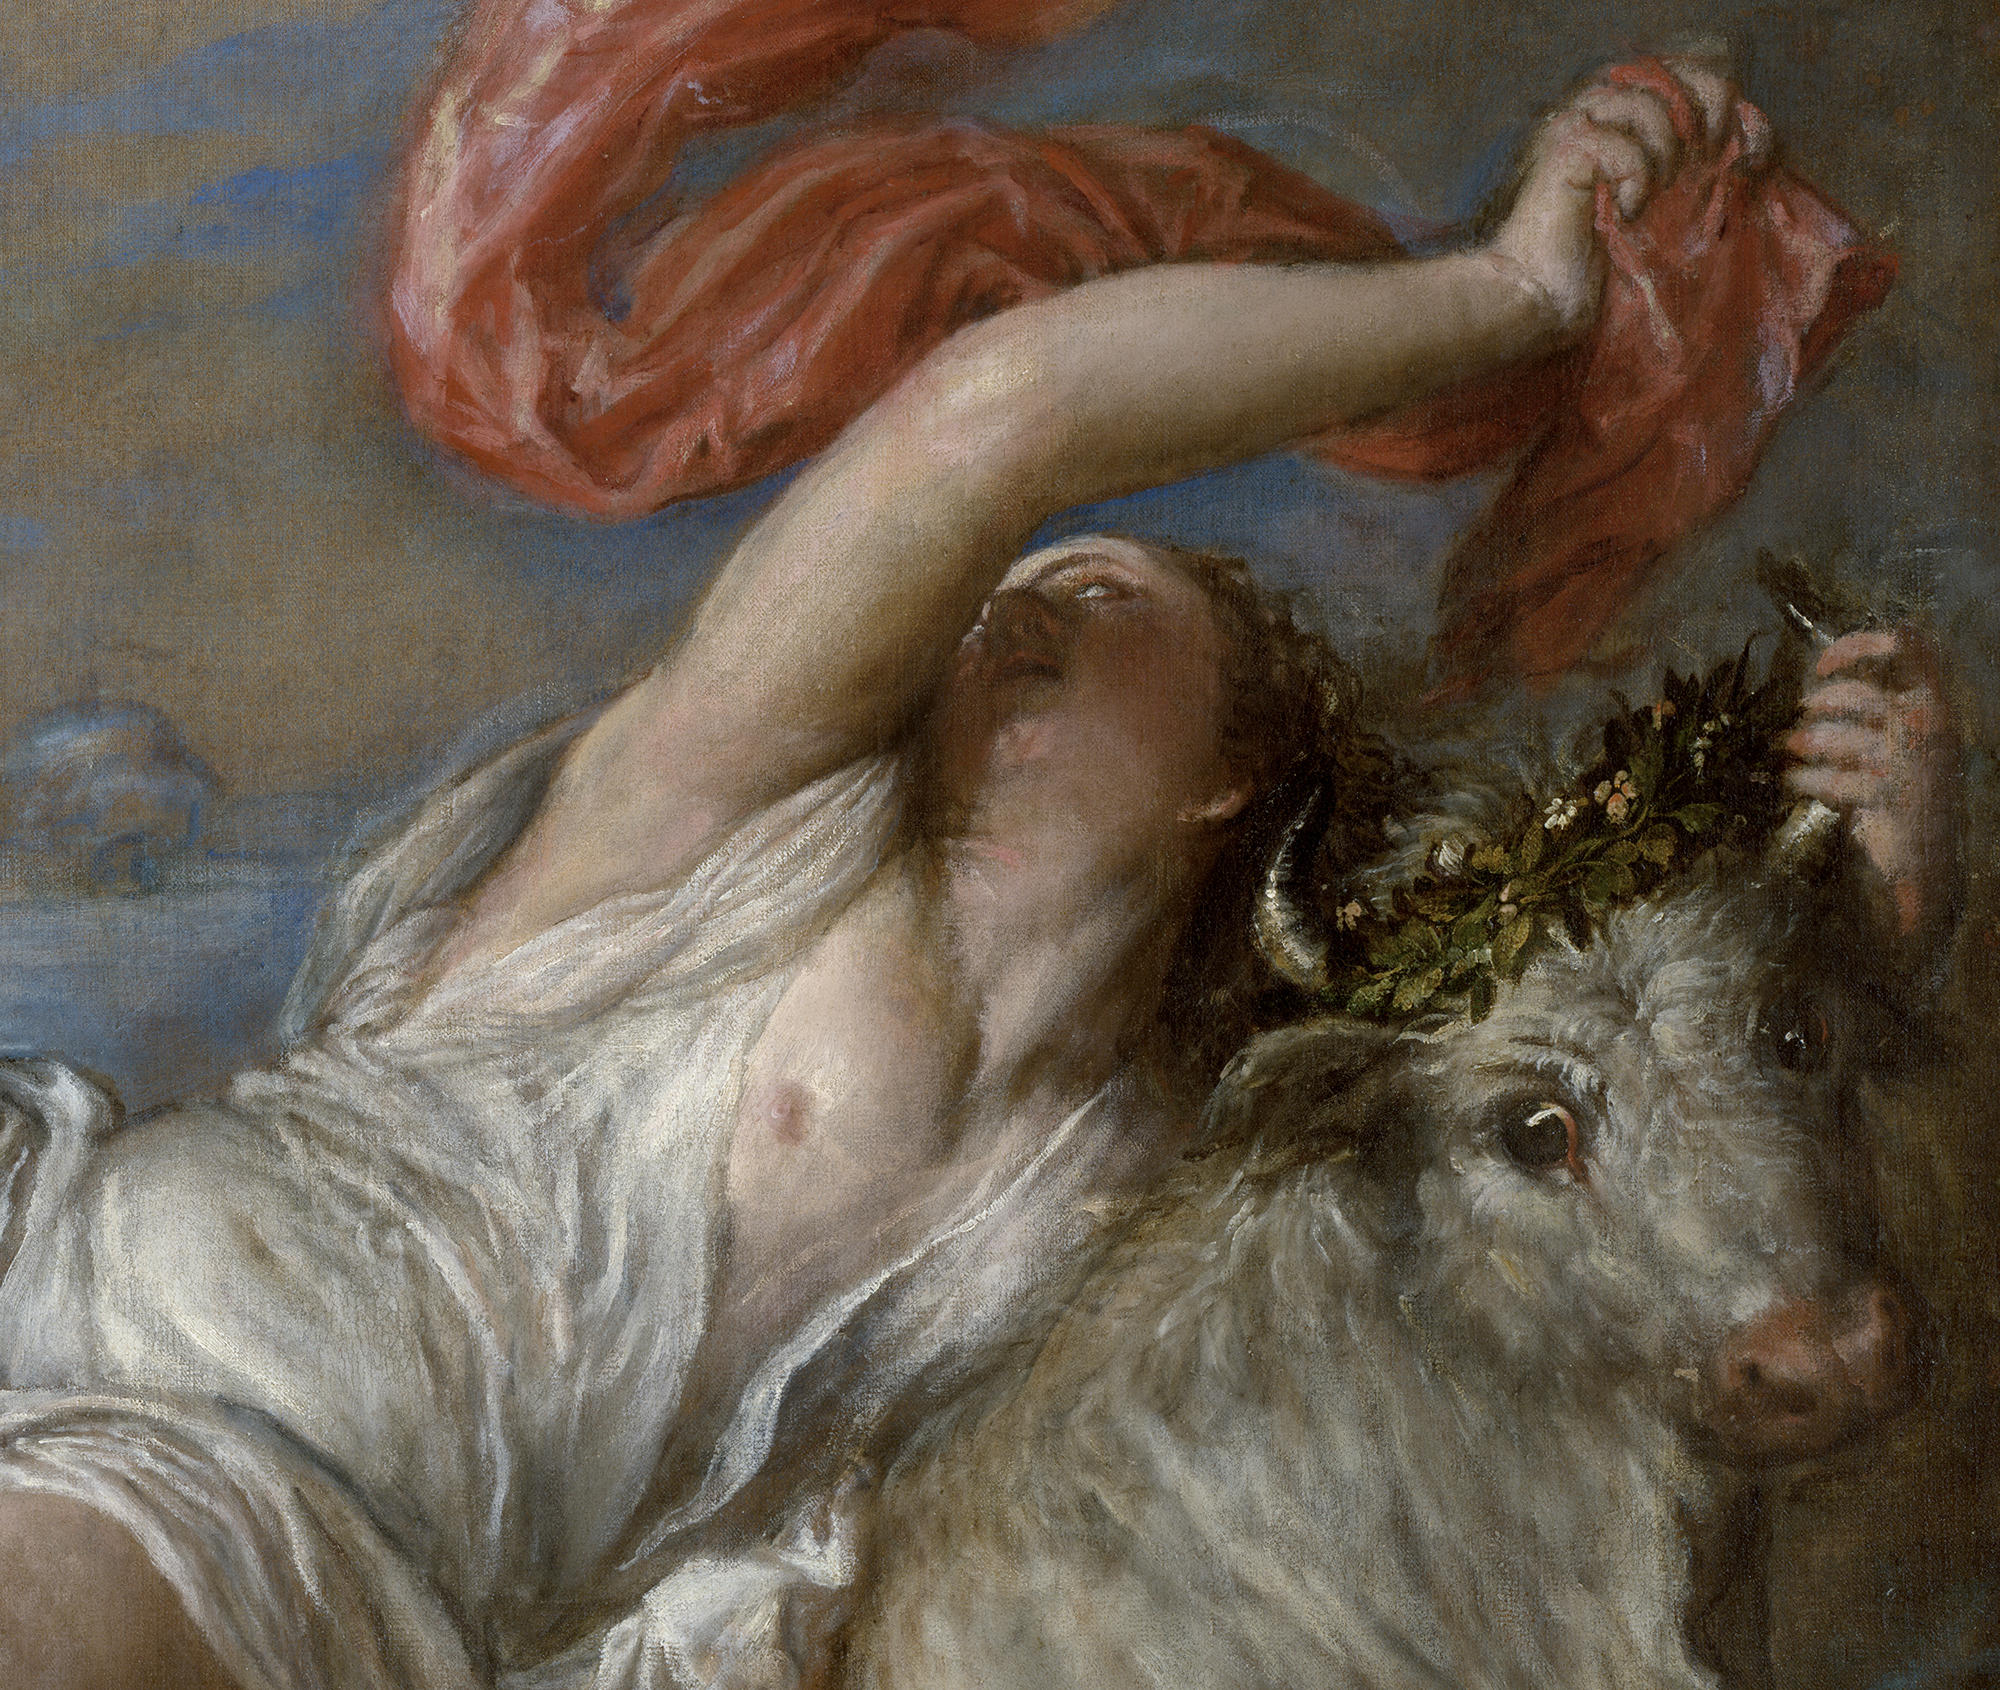 A close up of Europa from the painting Rape of Europa by Titian.